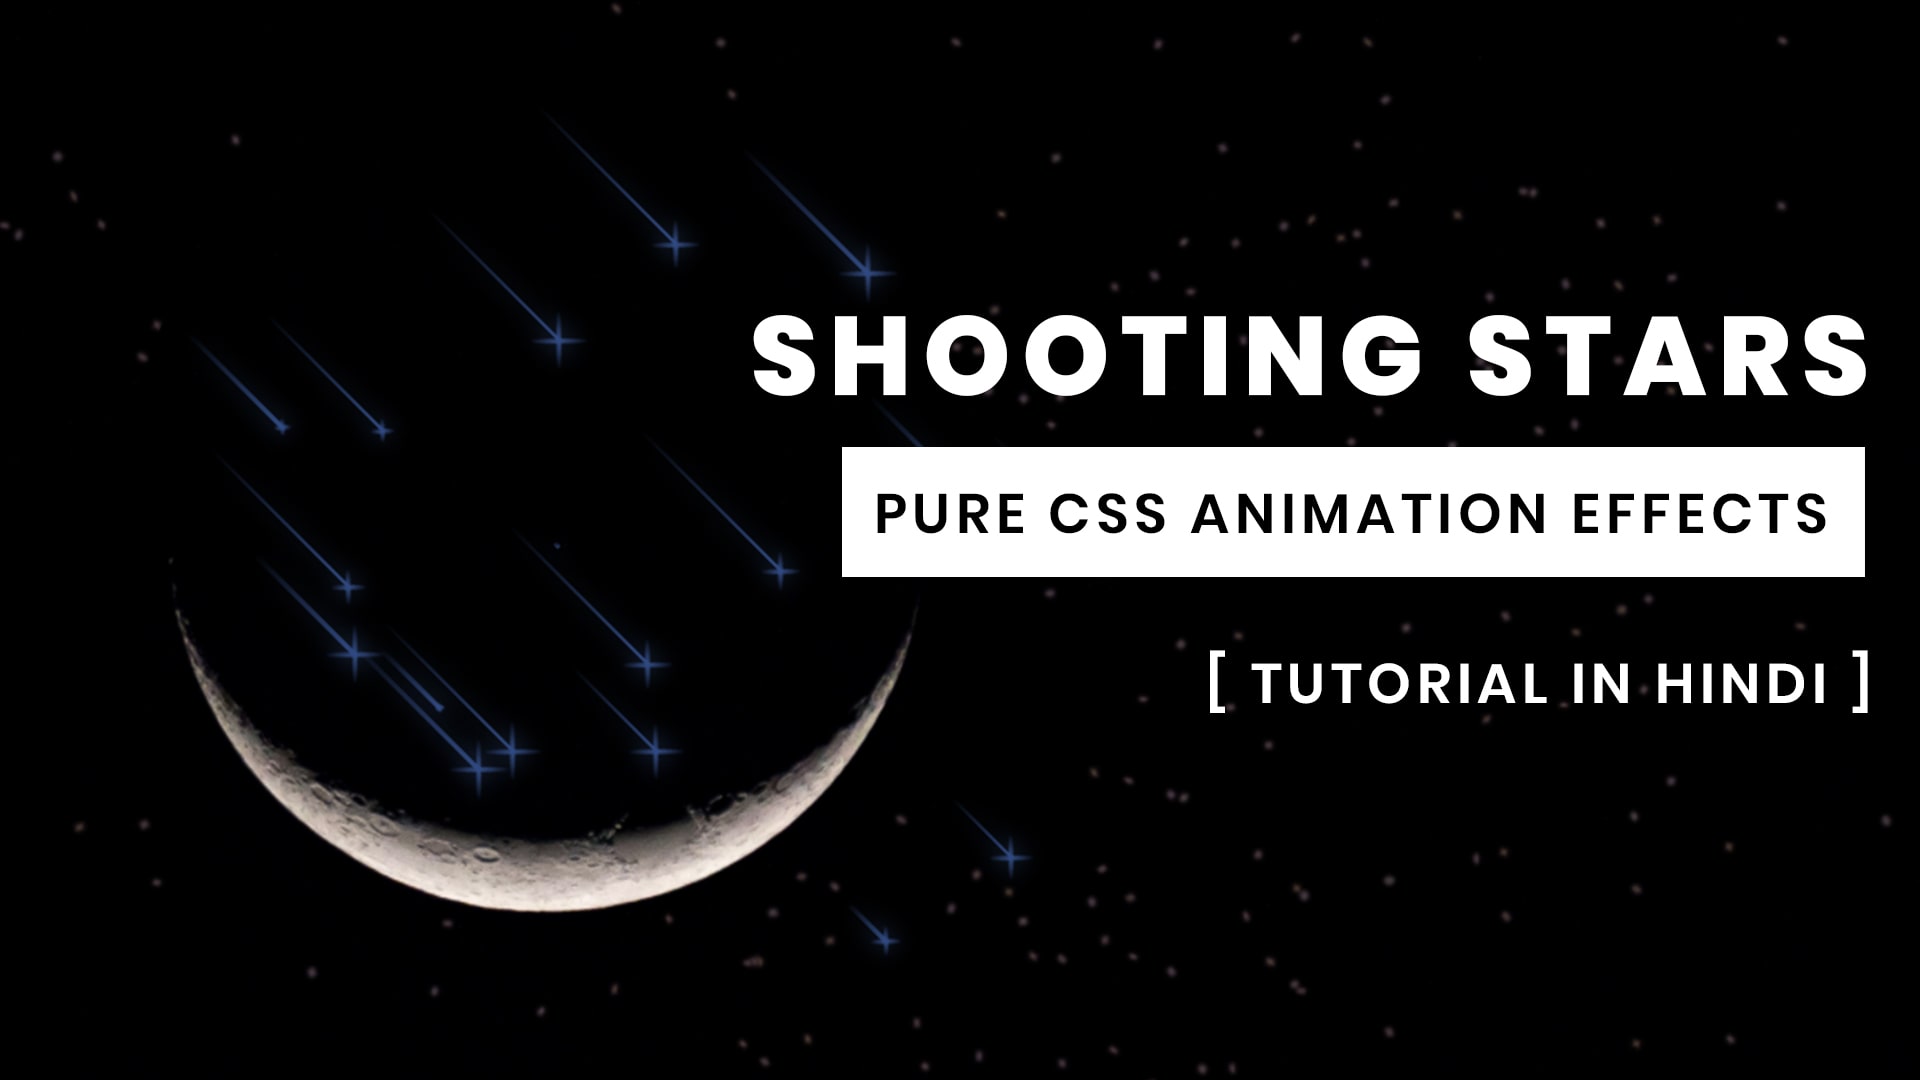 Amezing Pure CSS Shooting Stars Animation Effects | Code4education.